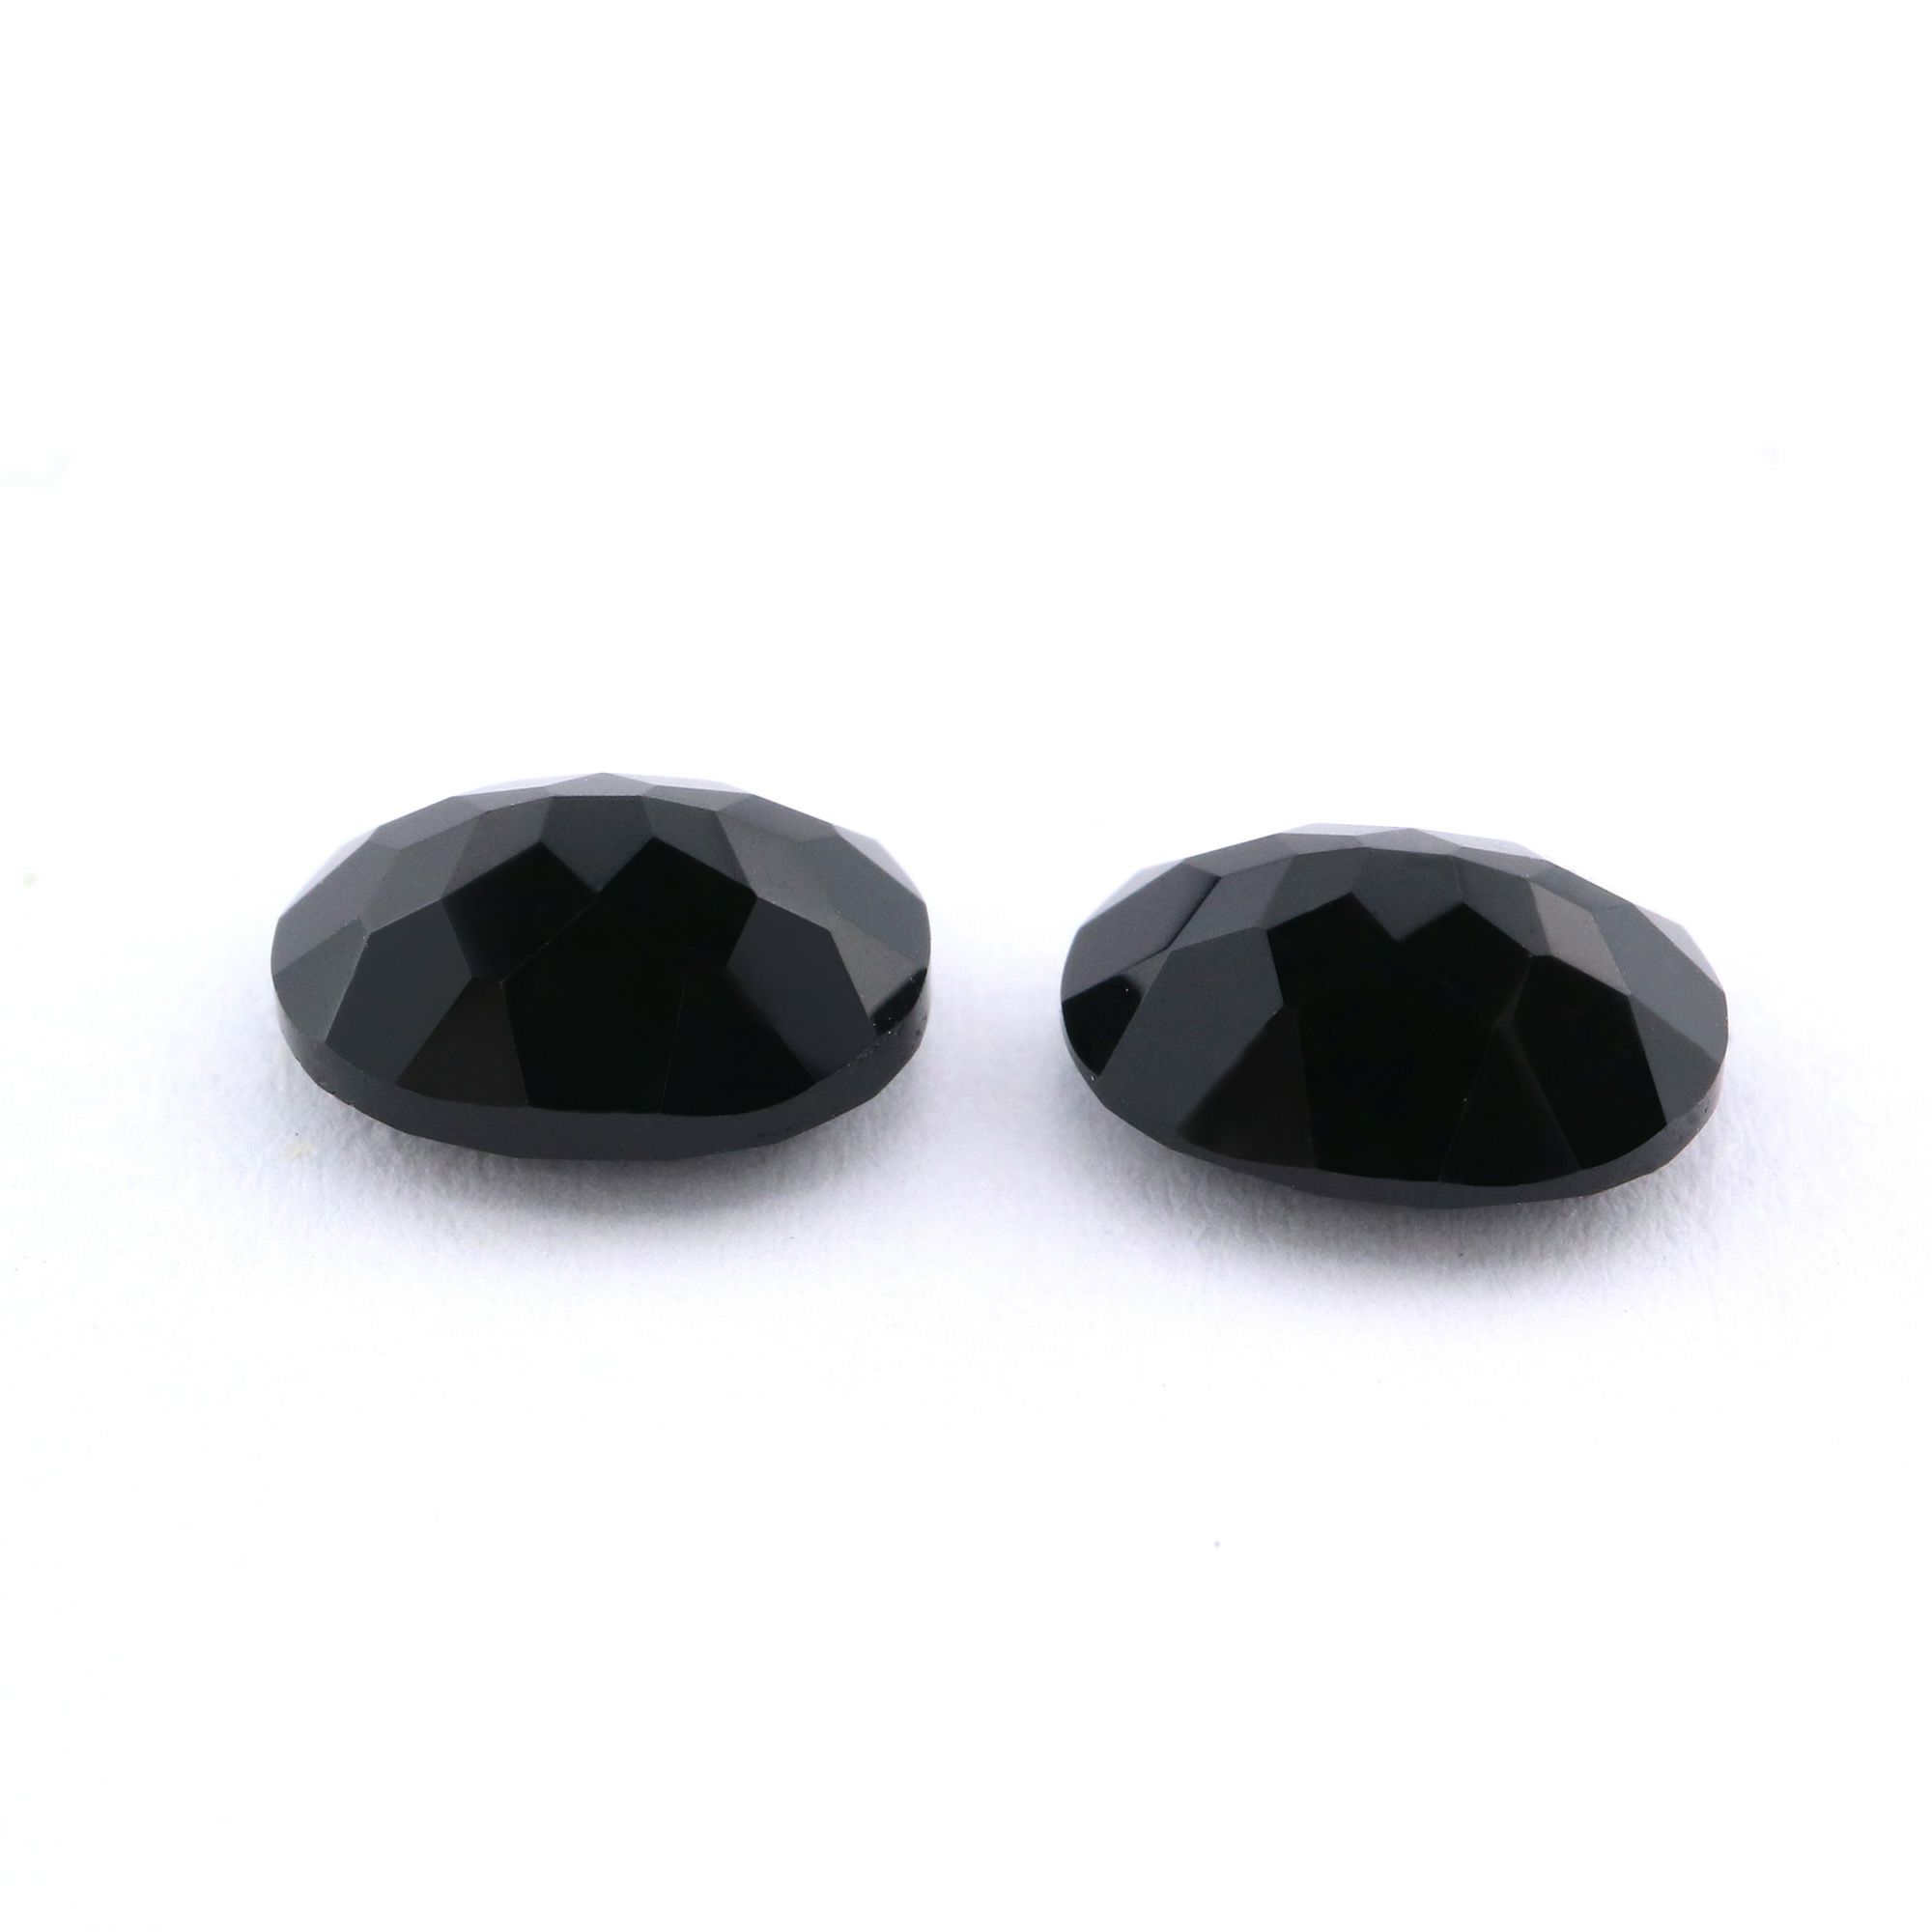 1Pcs Natural Oval Black Onyx Faceted Cut Loose Gemstone Nature Semi Precious Stone DIY Jewelry Supplies 4120129 - Click Image to Close